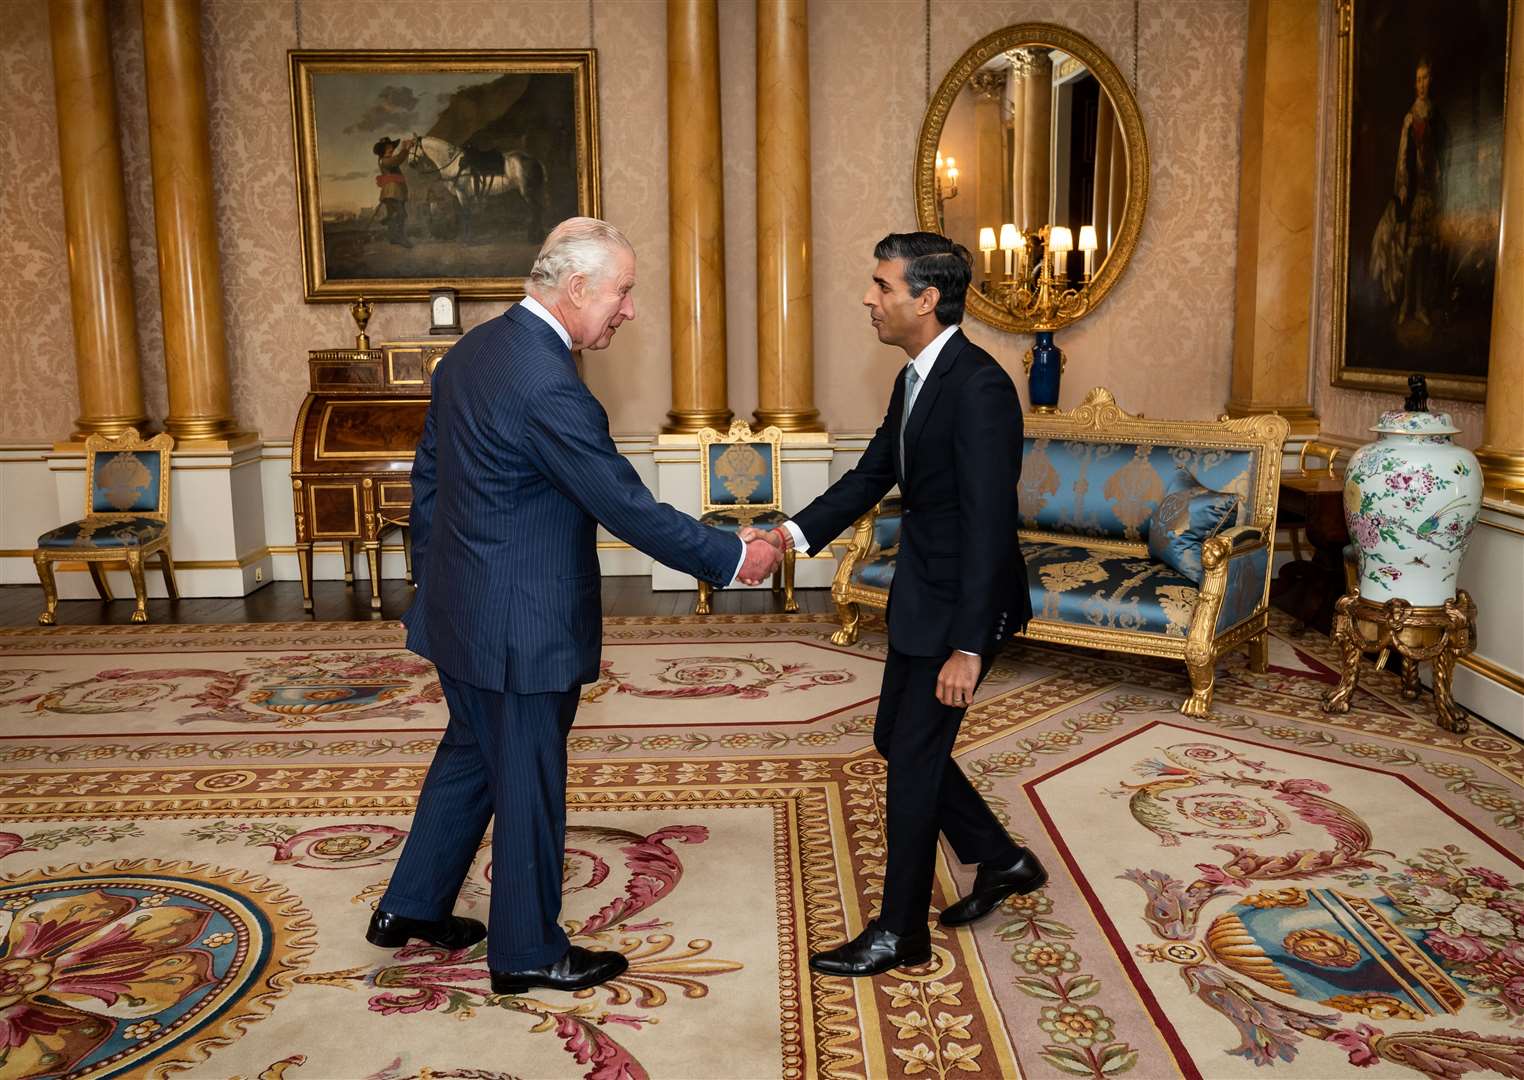 King Charles III welcomes Rishi Sunak during an audience at Buckingham Palace, London Picture: PA